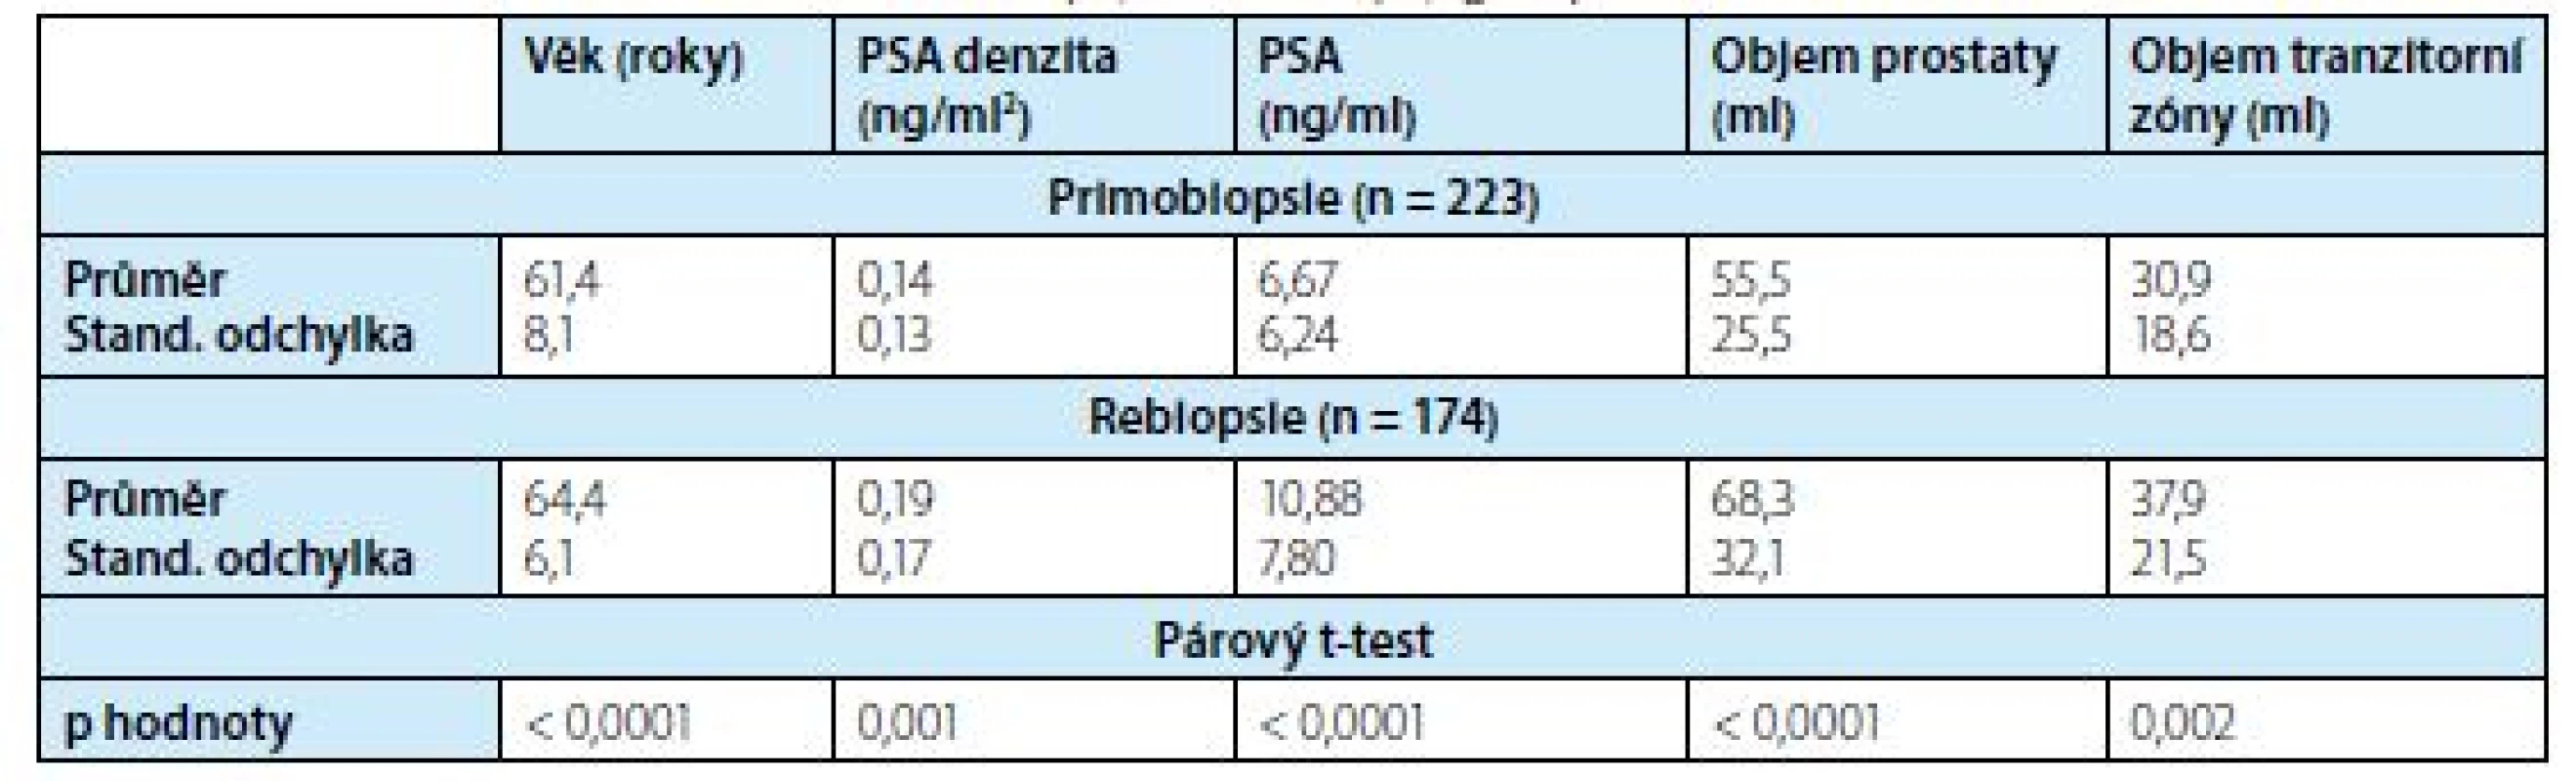 Charakteristika pacientů ve skupinách o primobiopsii a rebiopsii<br>
Tab. 1. Clinical characteristics of the first biopsy and rebiopsy groups